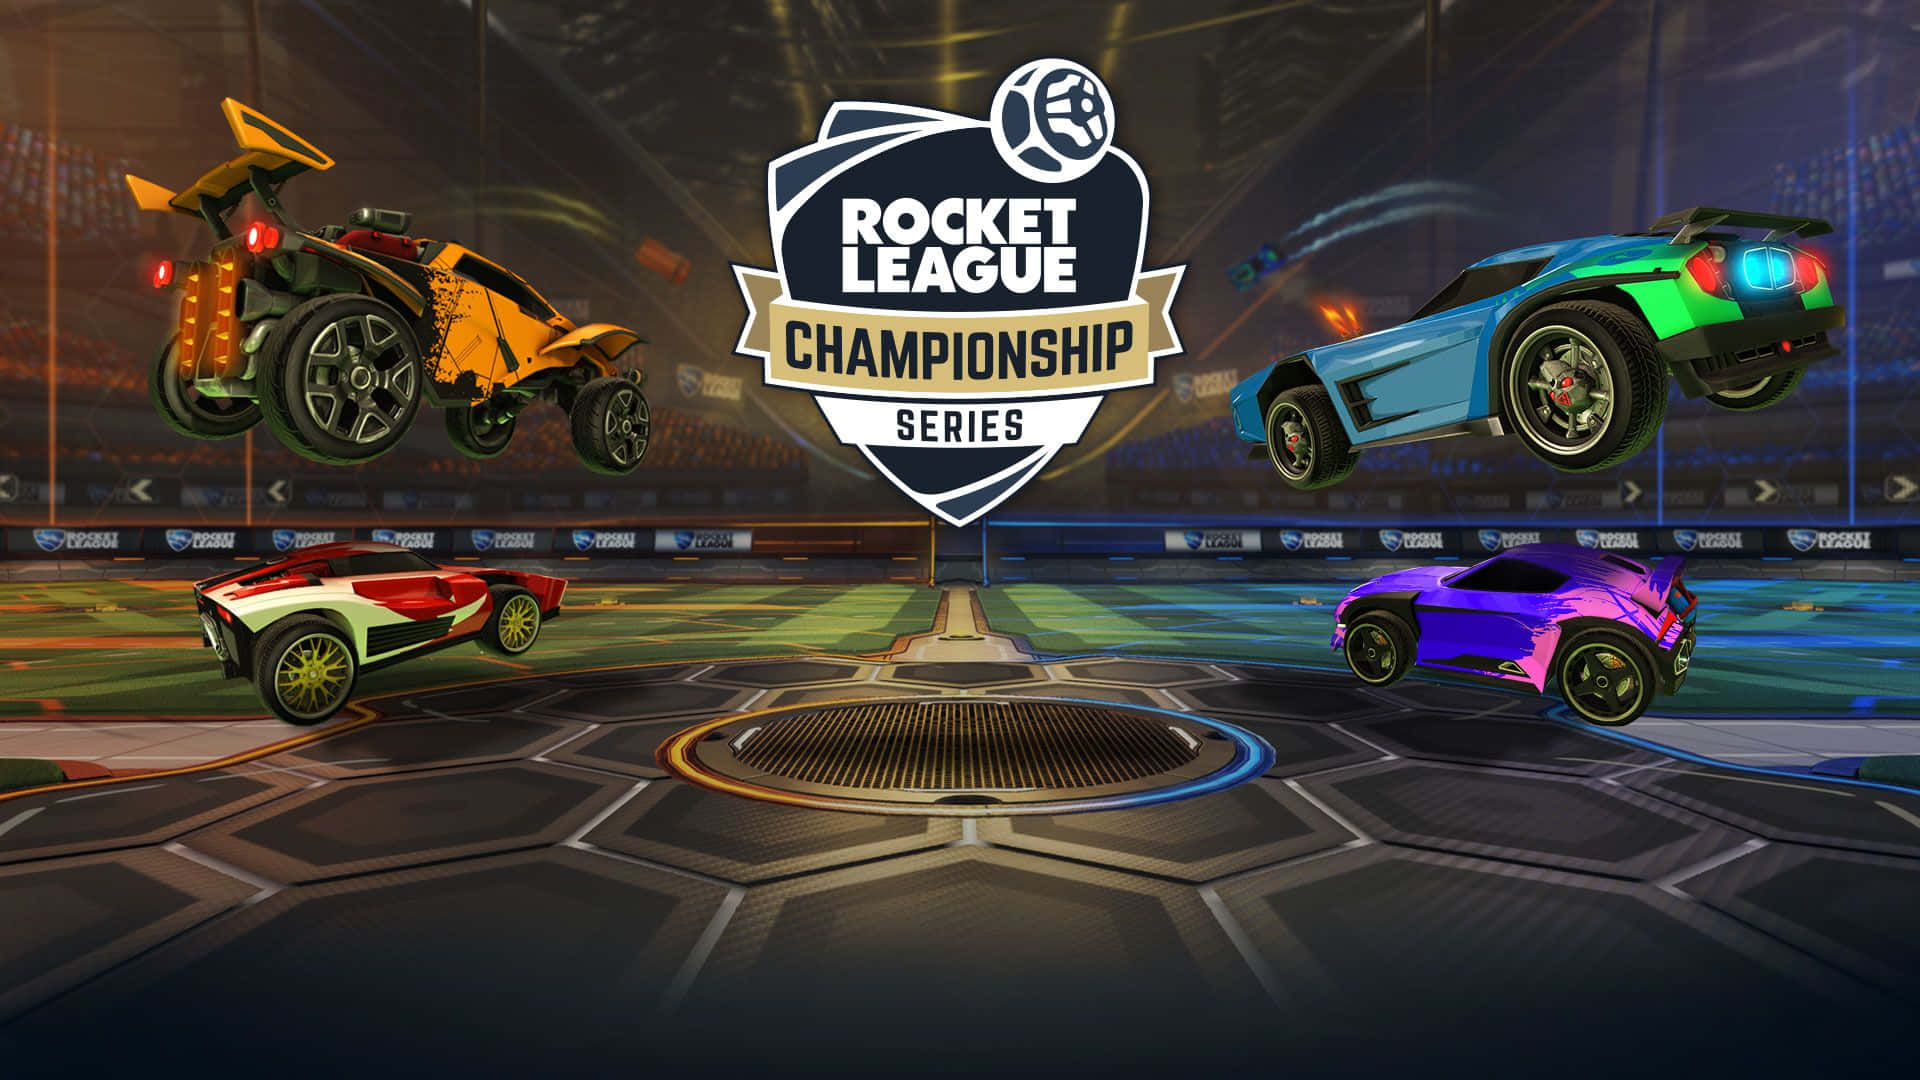 Get ready for Rocket League with this explosive HD wallpaper!